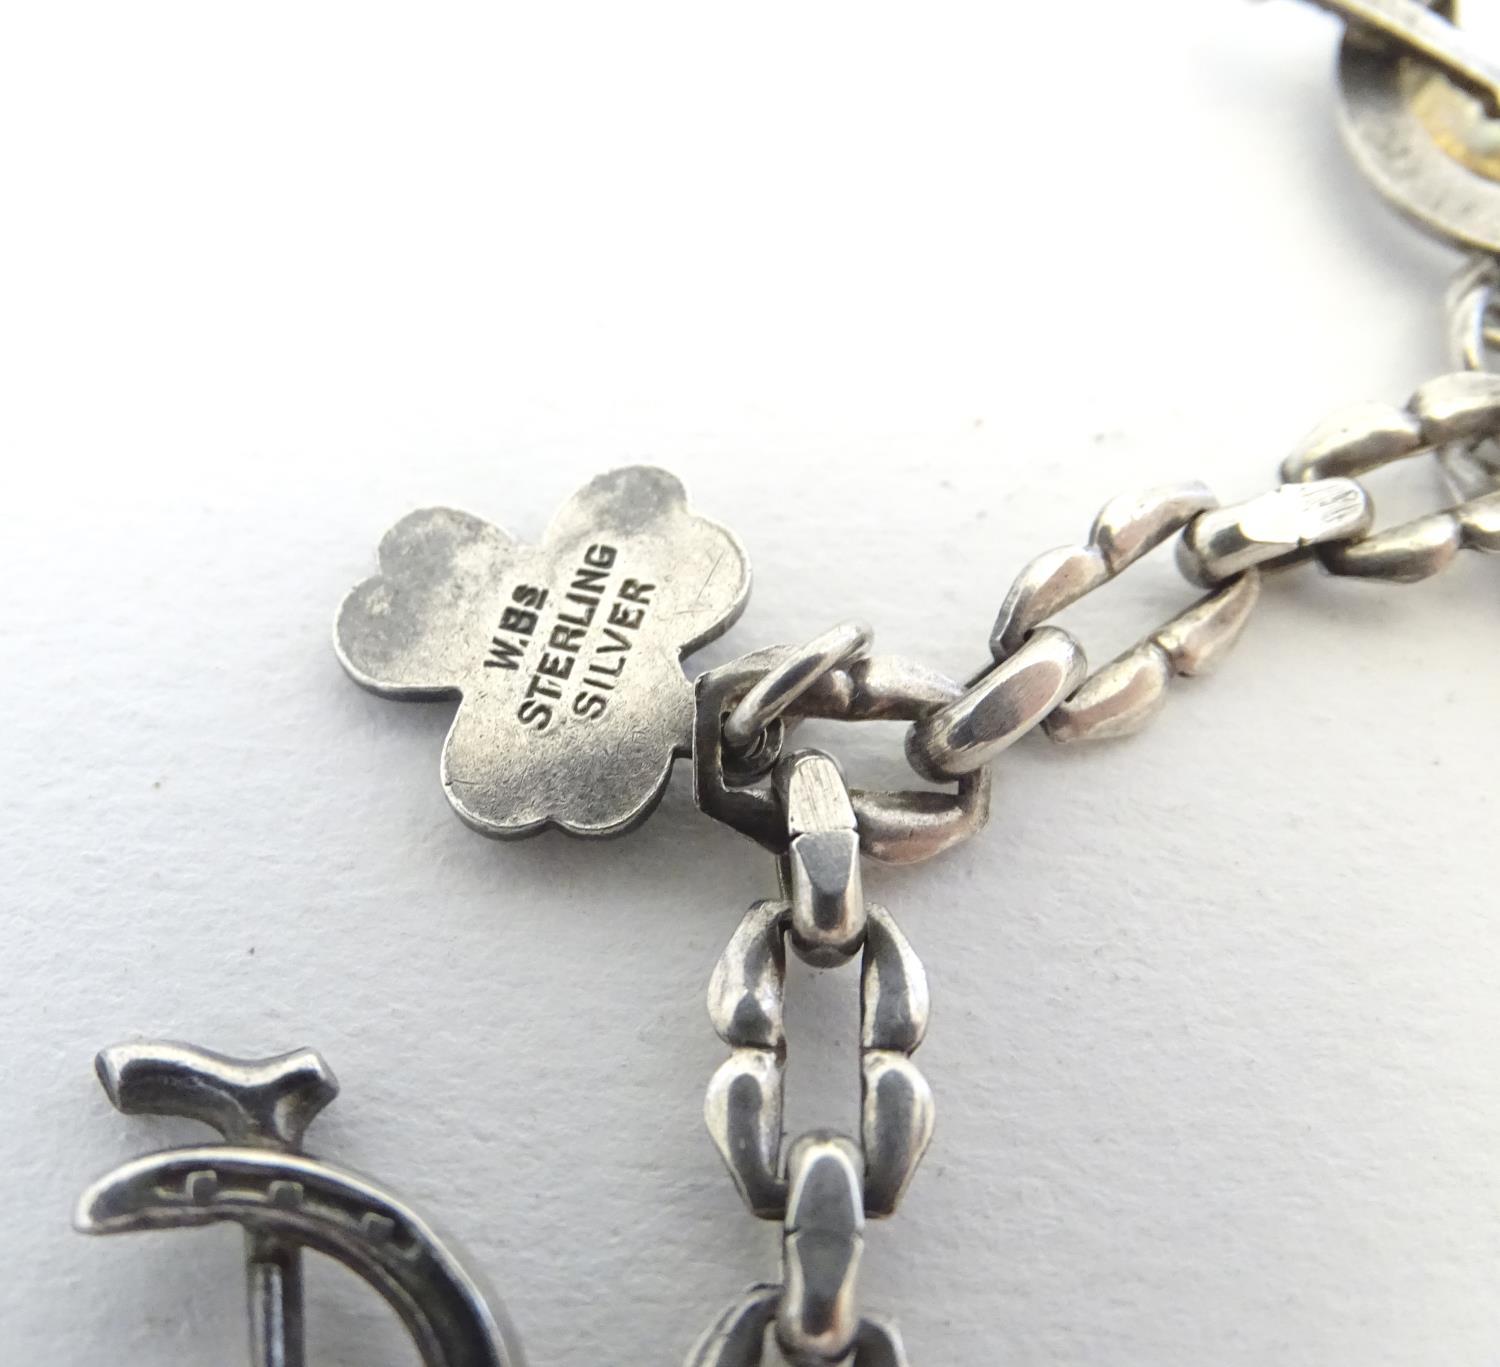 A silver charm bracelet set with various charms including horseshoe, horsehead and horseshoe and - Image 9 of 9